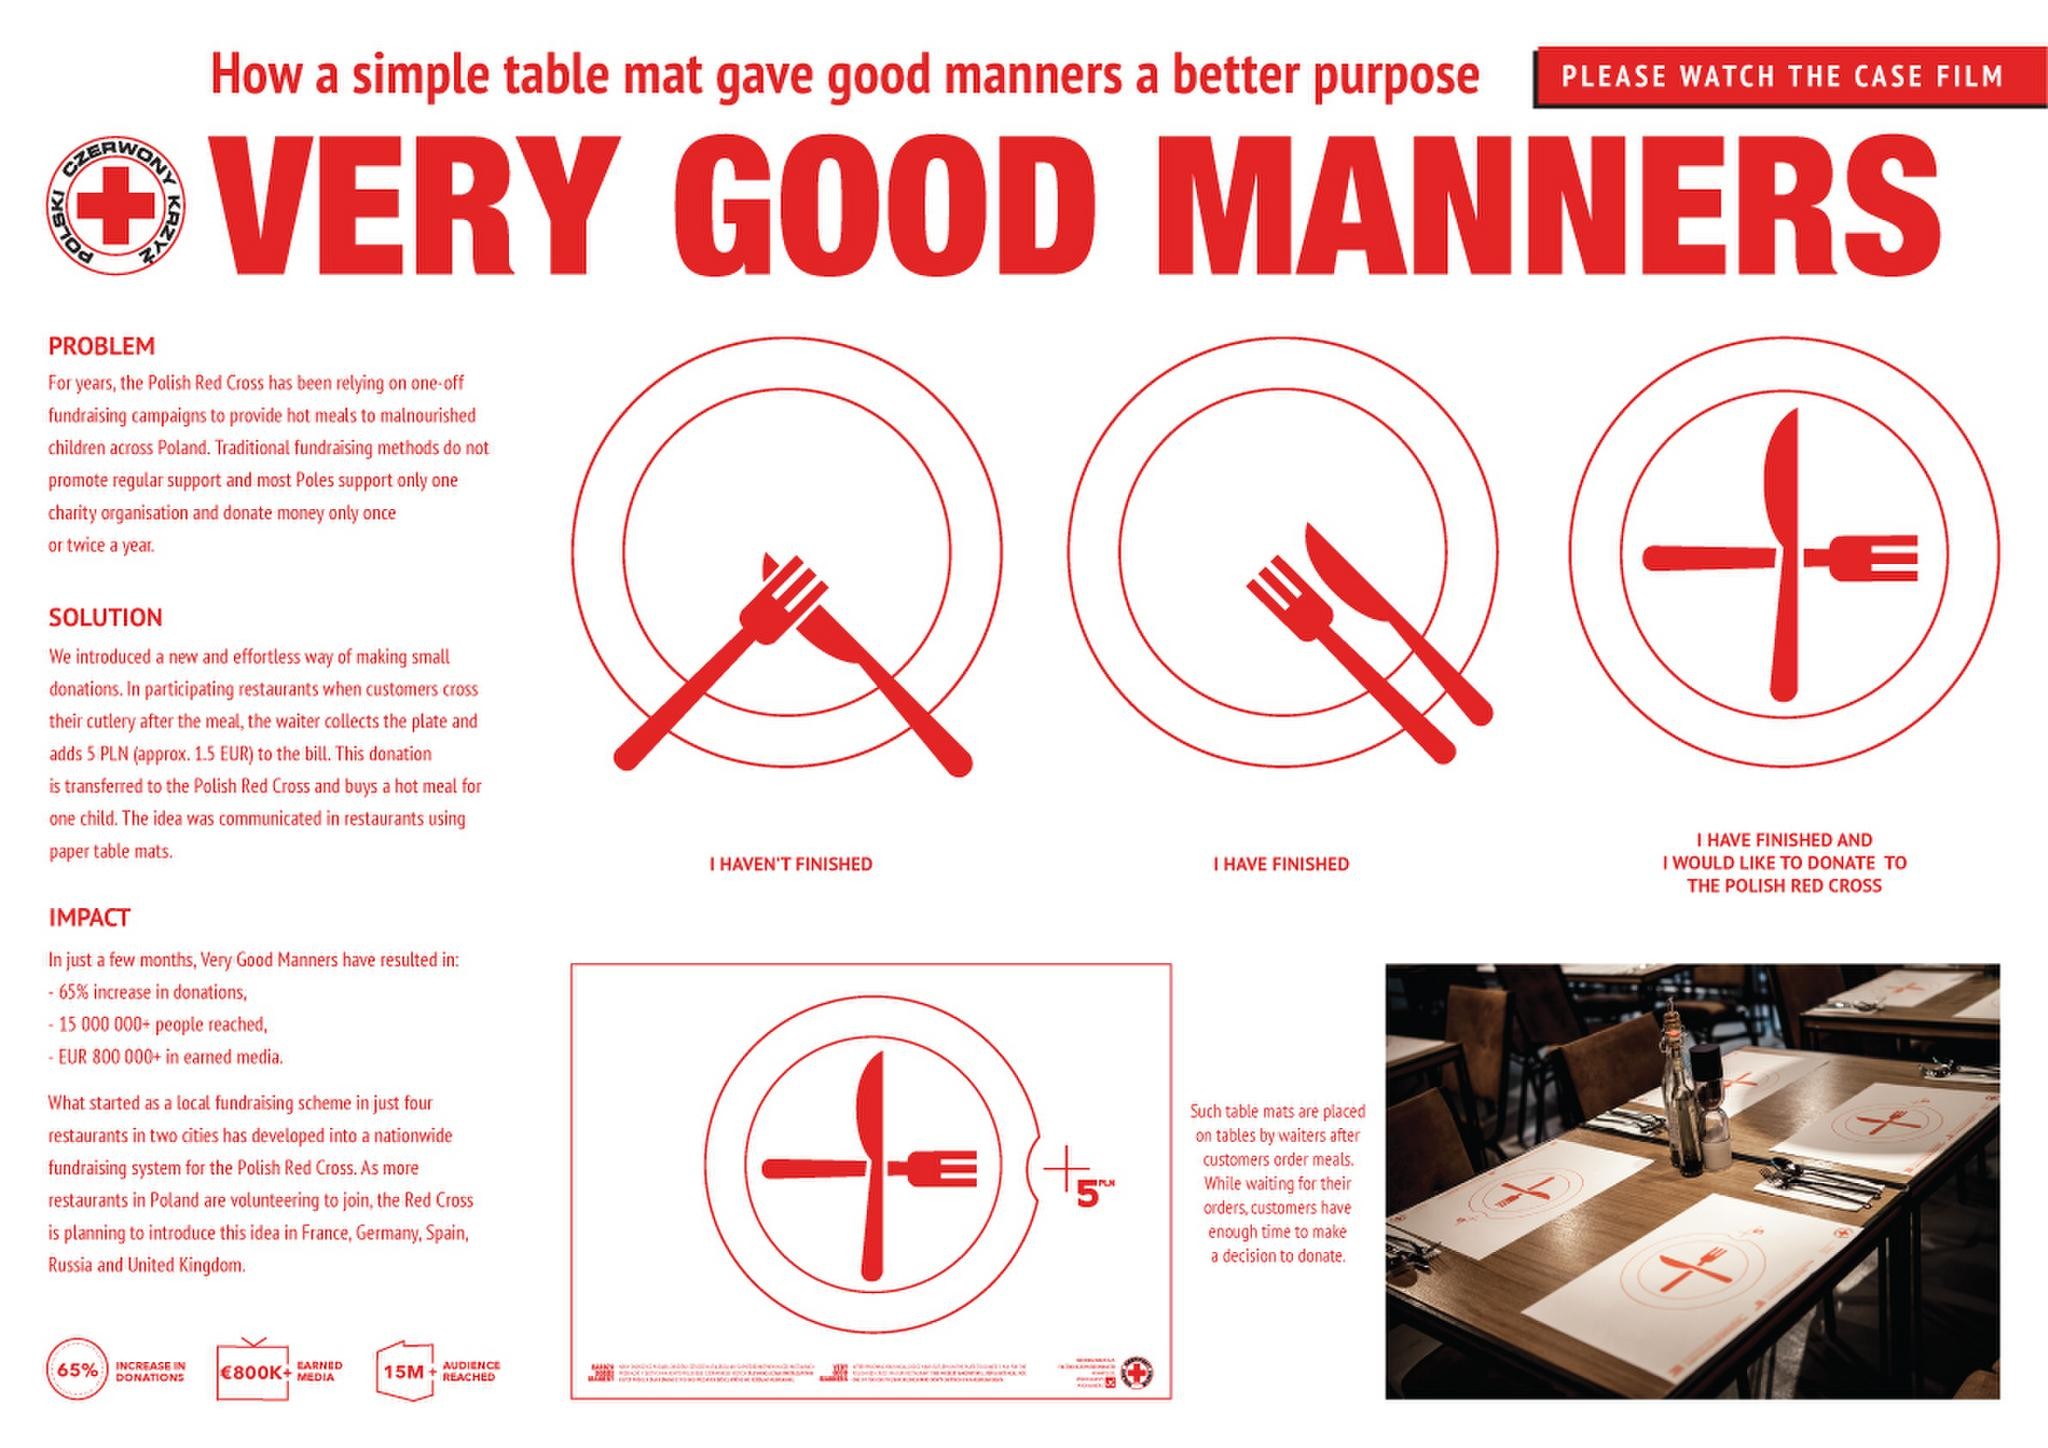 VERY GOOD MANNERS